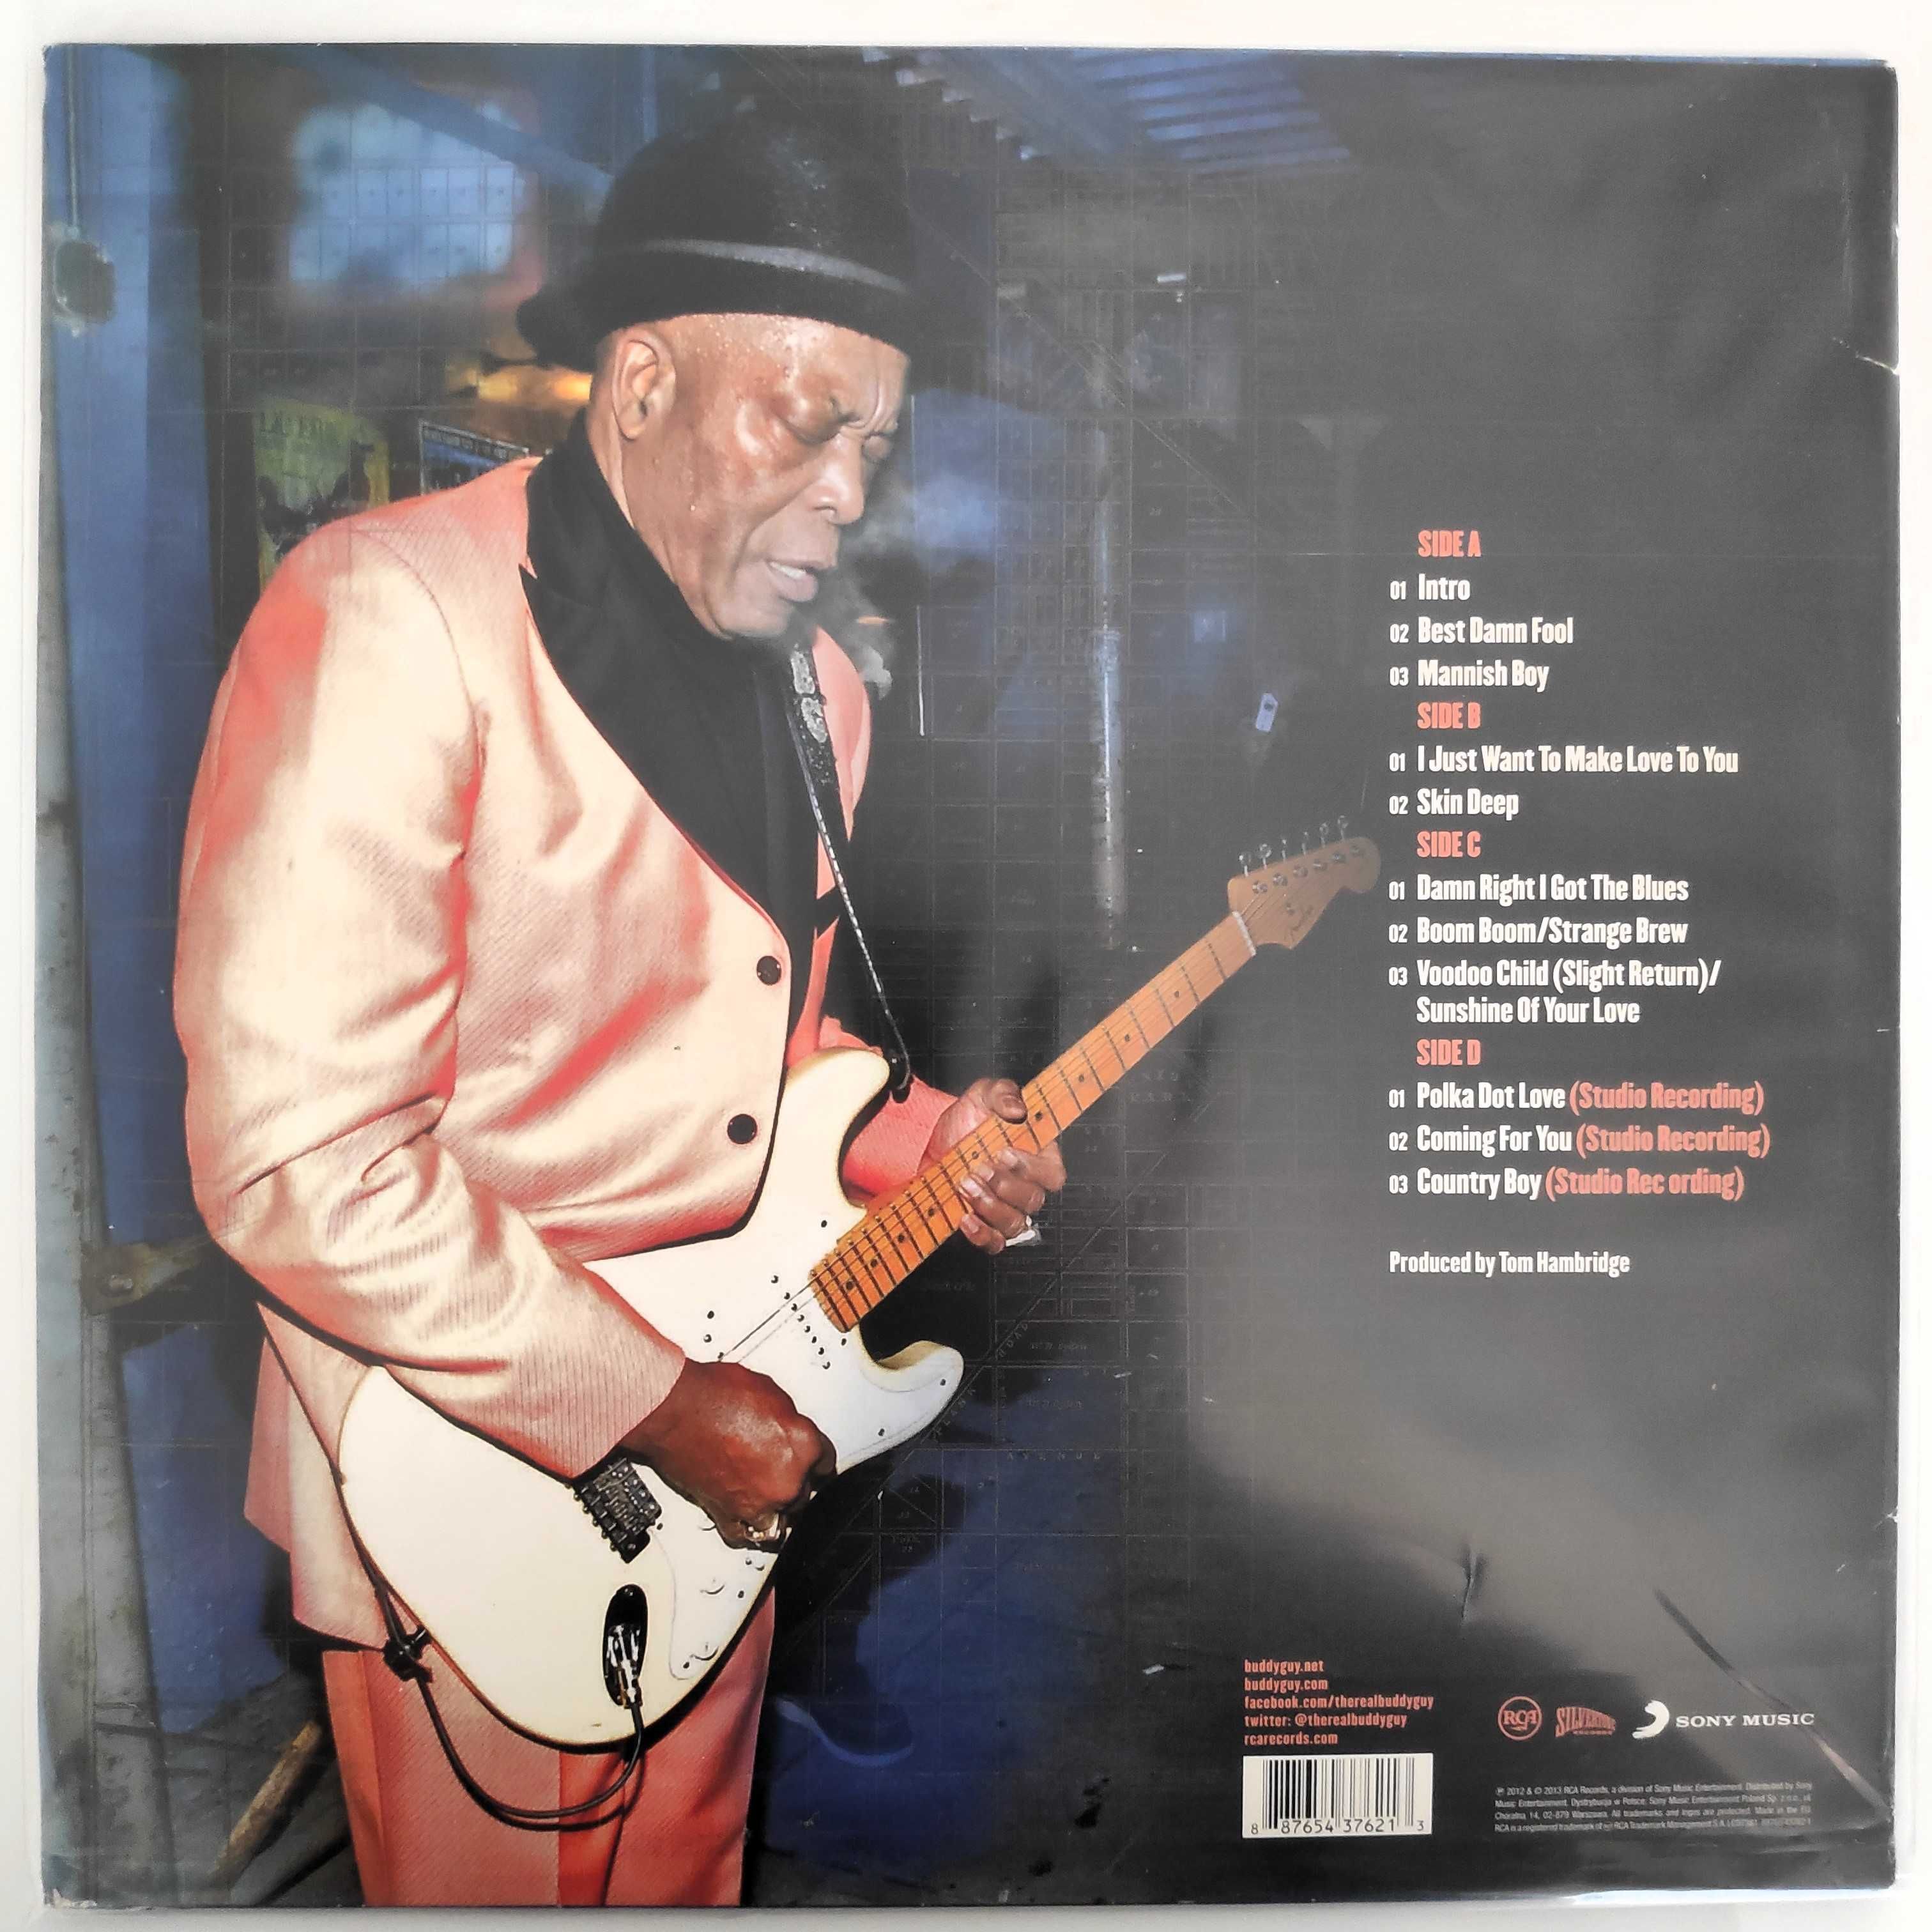 Buddy Guy - Live At Legends